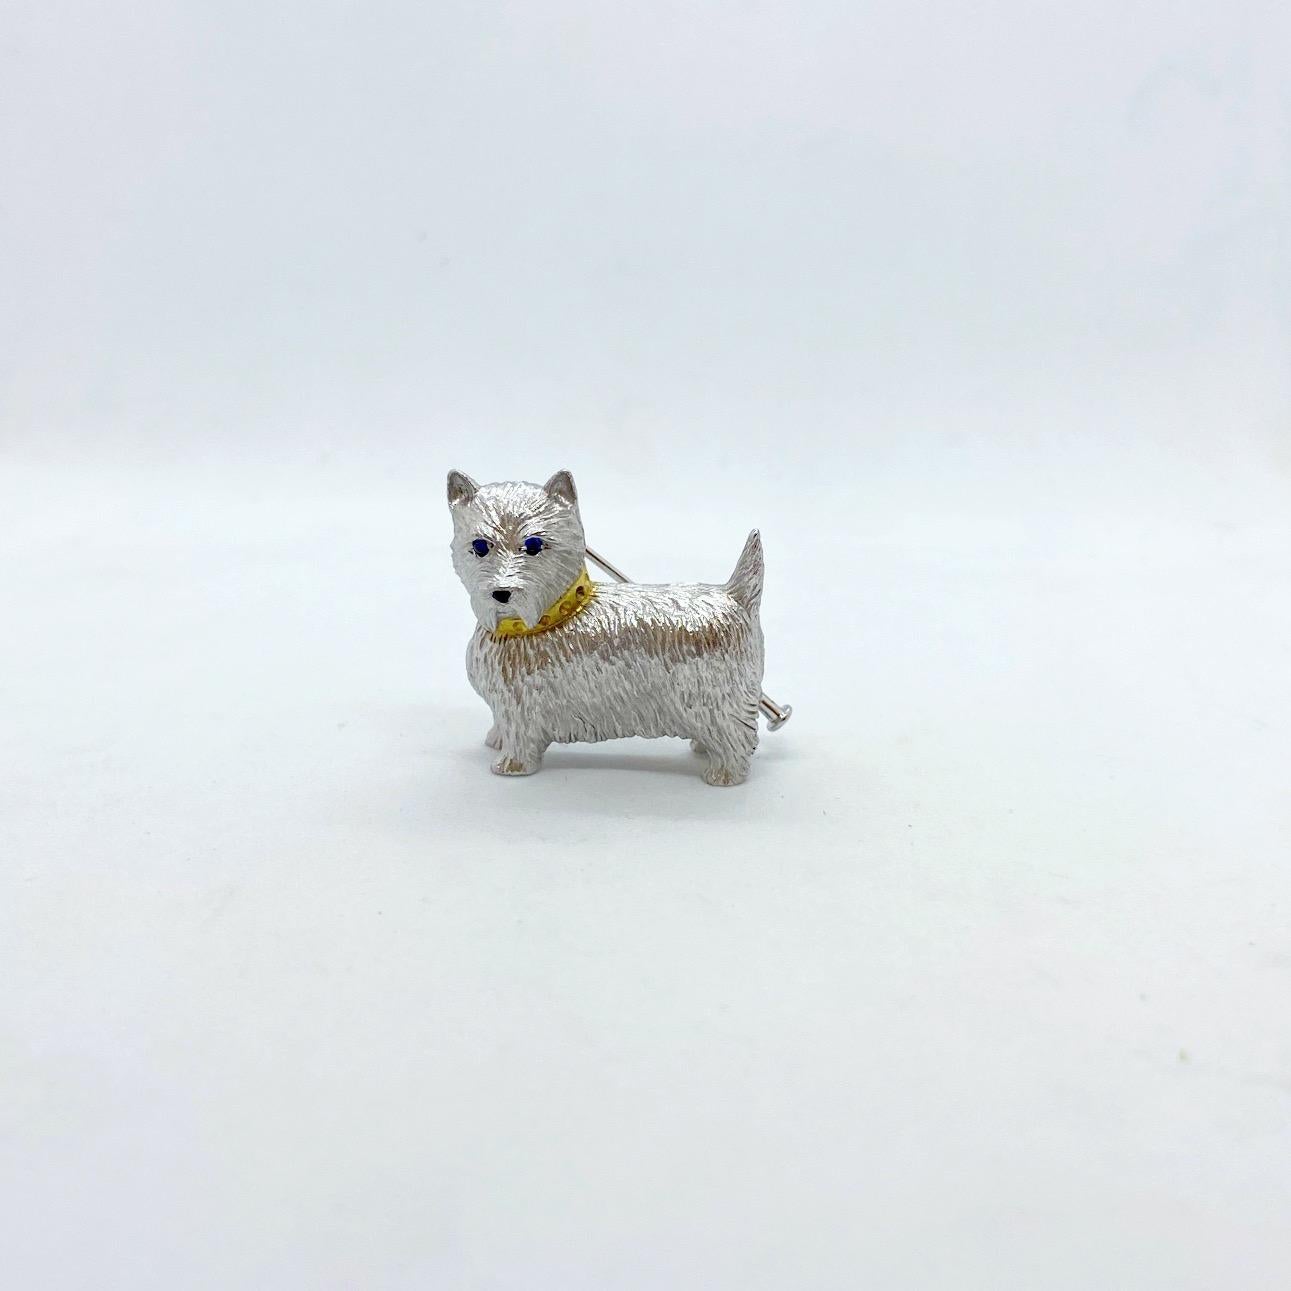 E. Wolfe & Co is a family-run fine jewellery manufacturing Workshop, established in 1850 and located in central London. They specialize in creating beautiful bespoke pieces.
This adorable Westie brooch is the perfect example of their exquisite